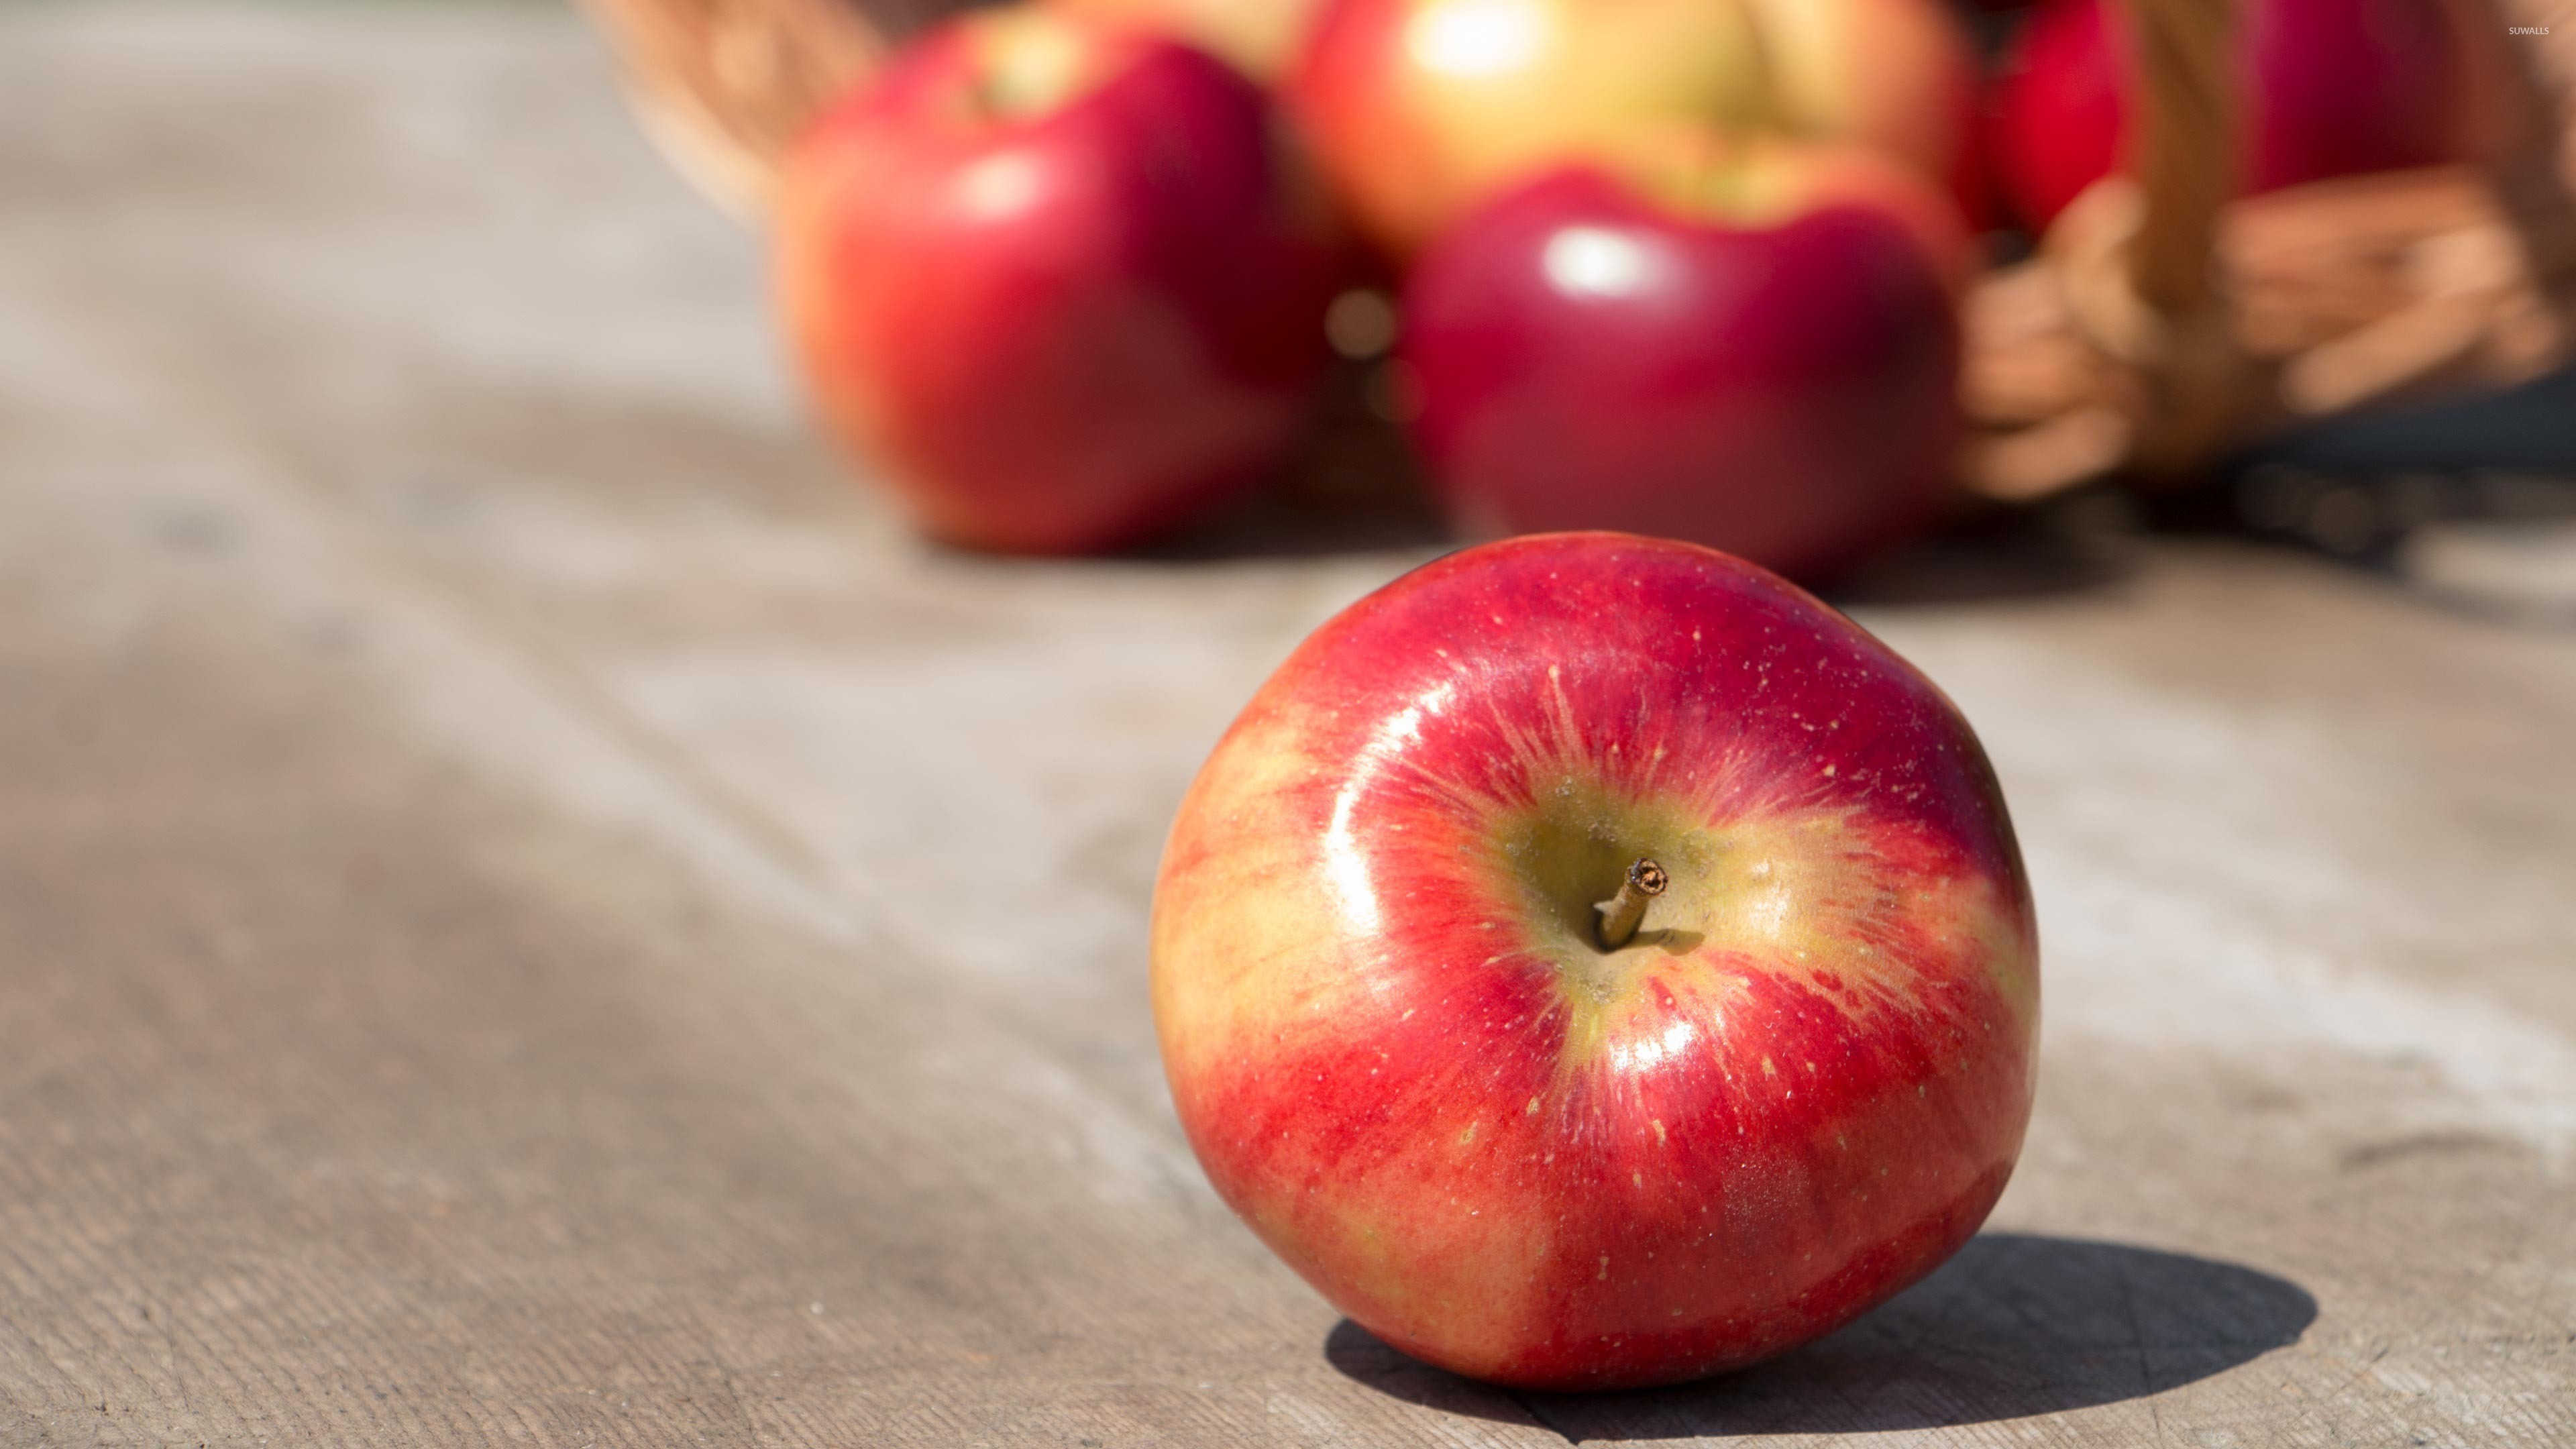 3840x2160 Red shiny apple on a wooden table wallpaper  jpg